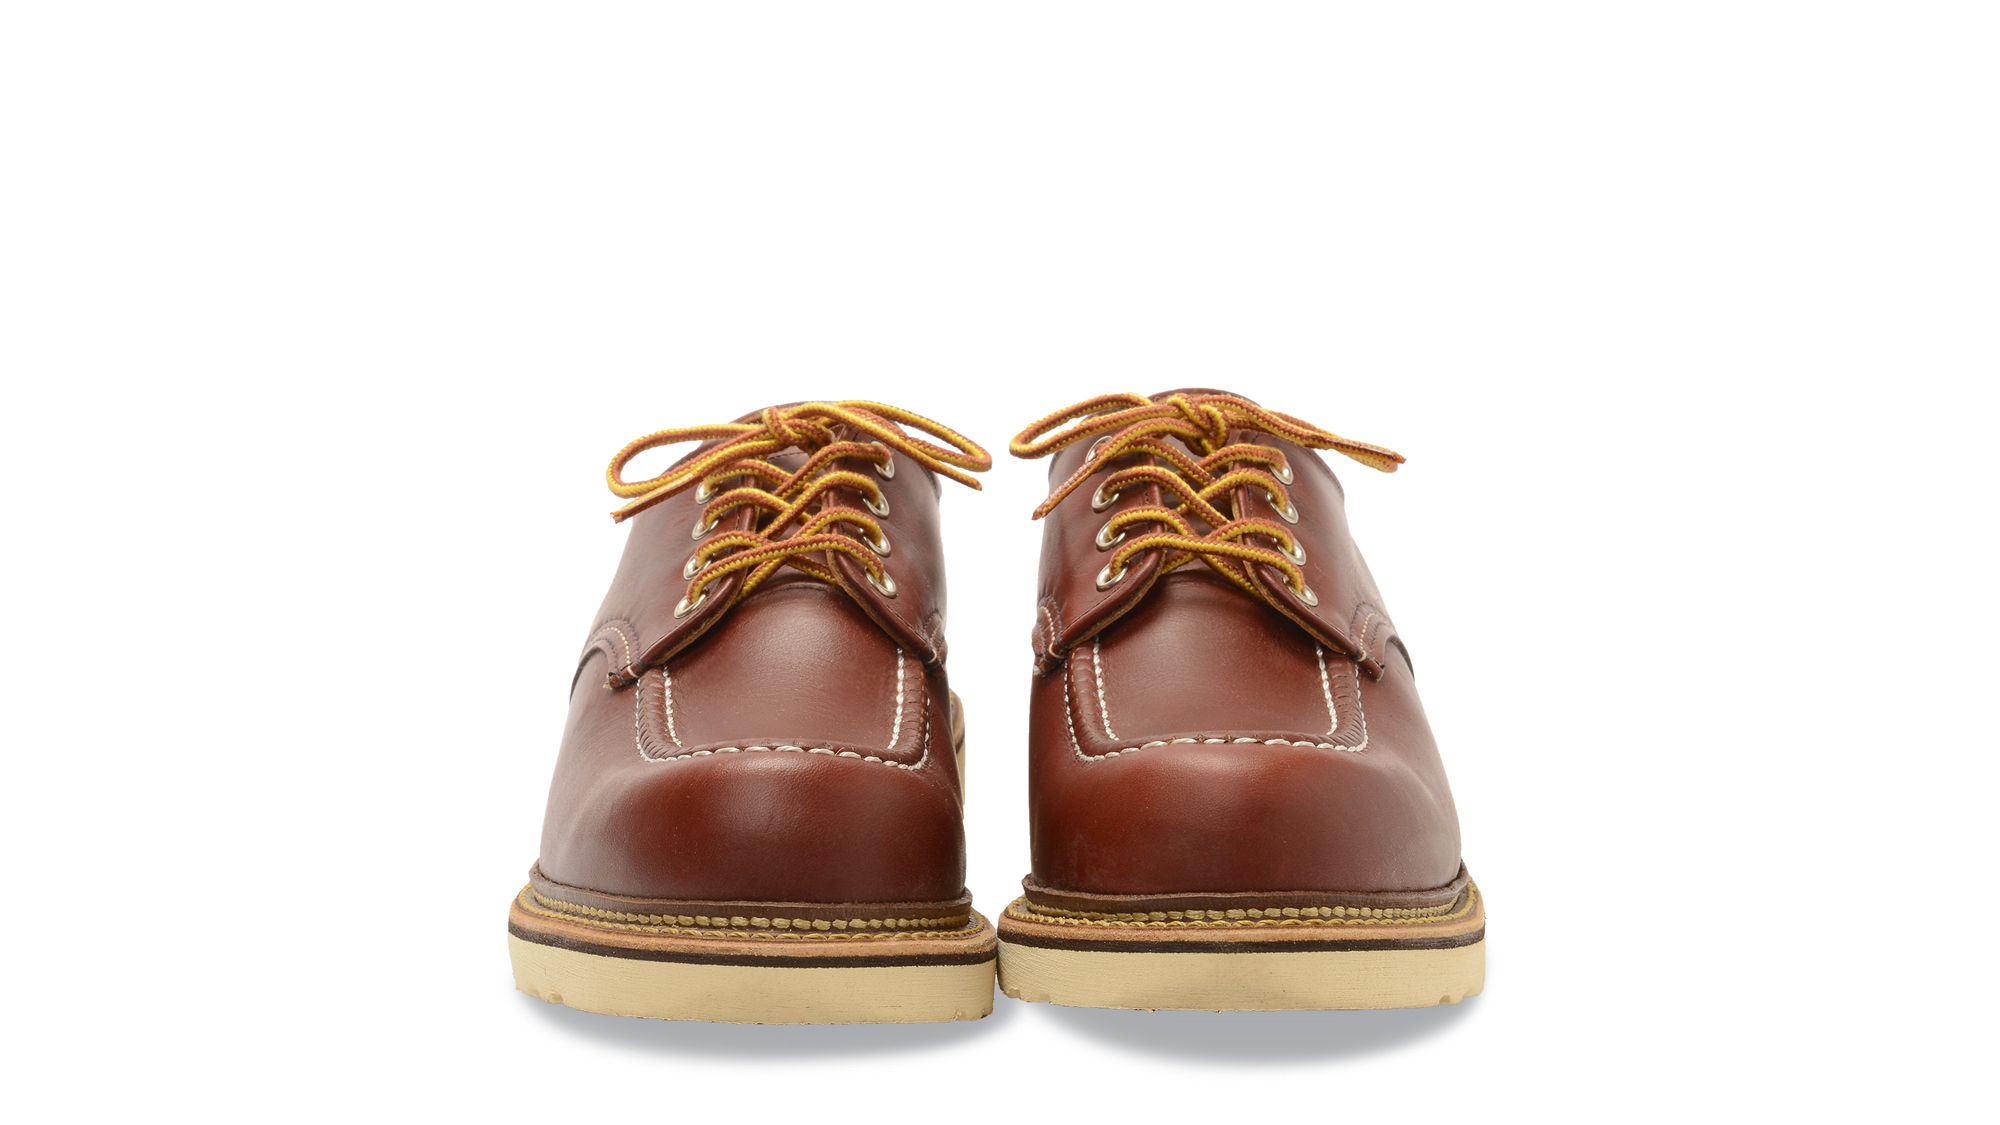 Shop the Moc Toe 8103 | Official Red Wing Shoes Online Store